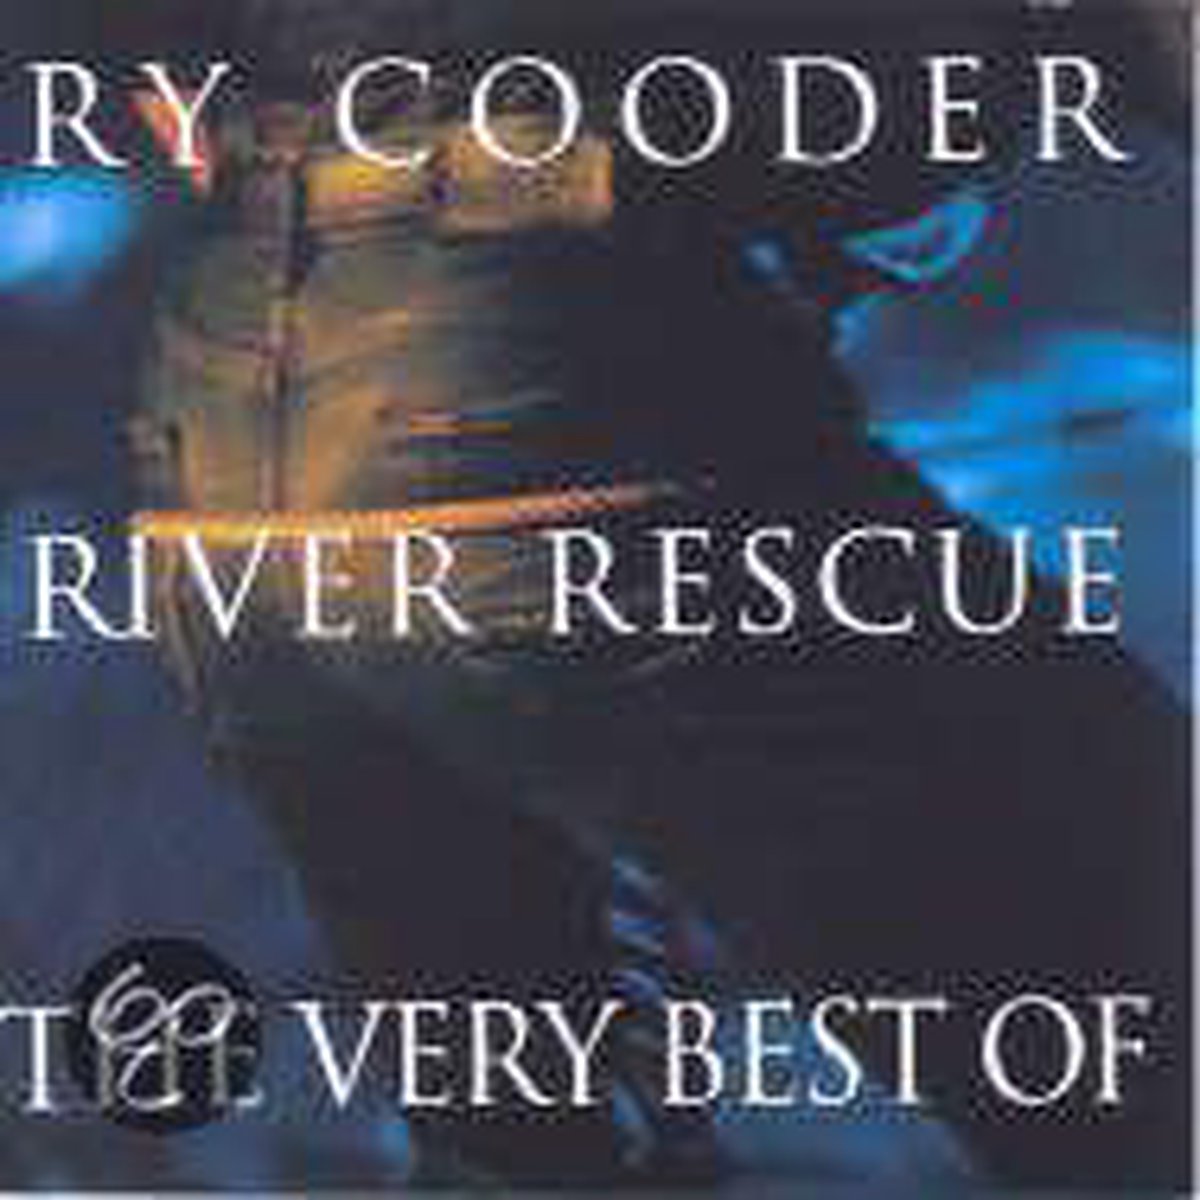 Cooder Ry - River Rescue-Very Best Of - Ry Cooder